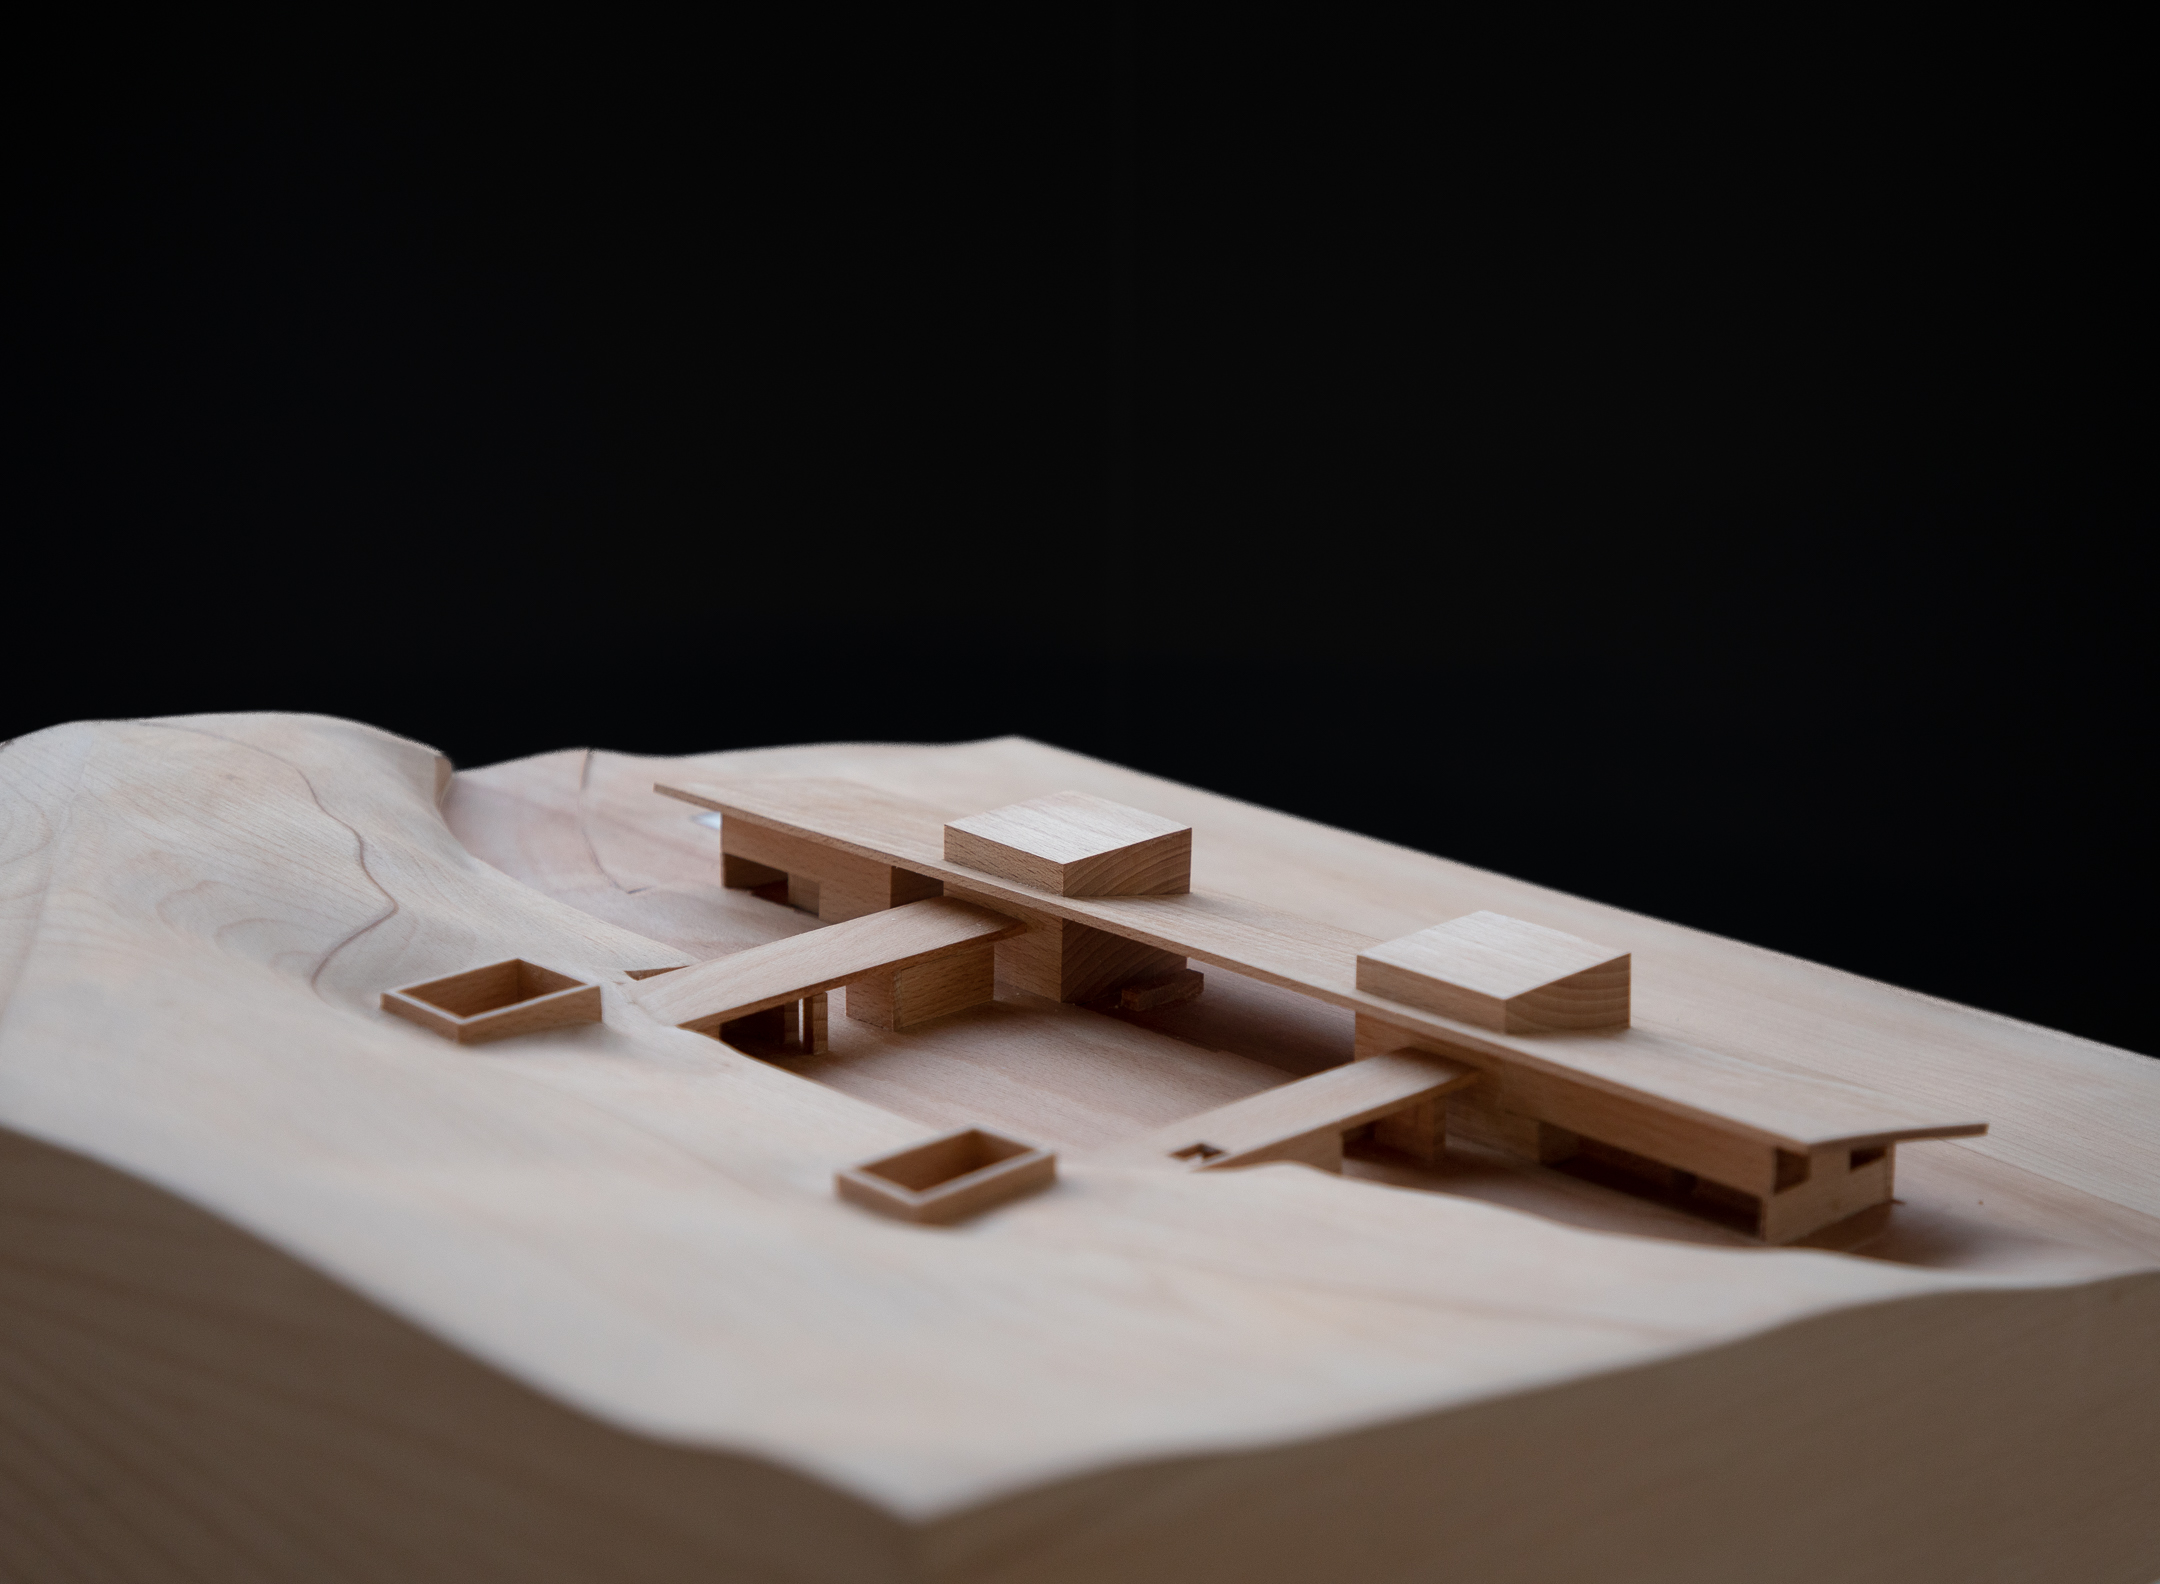 A dramatic Solid Timber Presentation Model